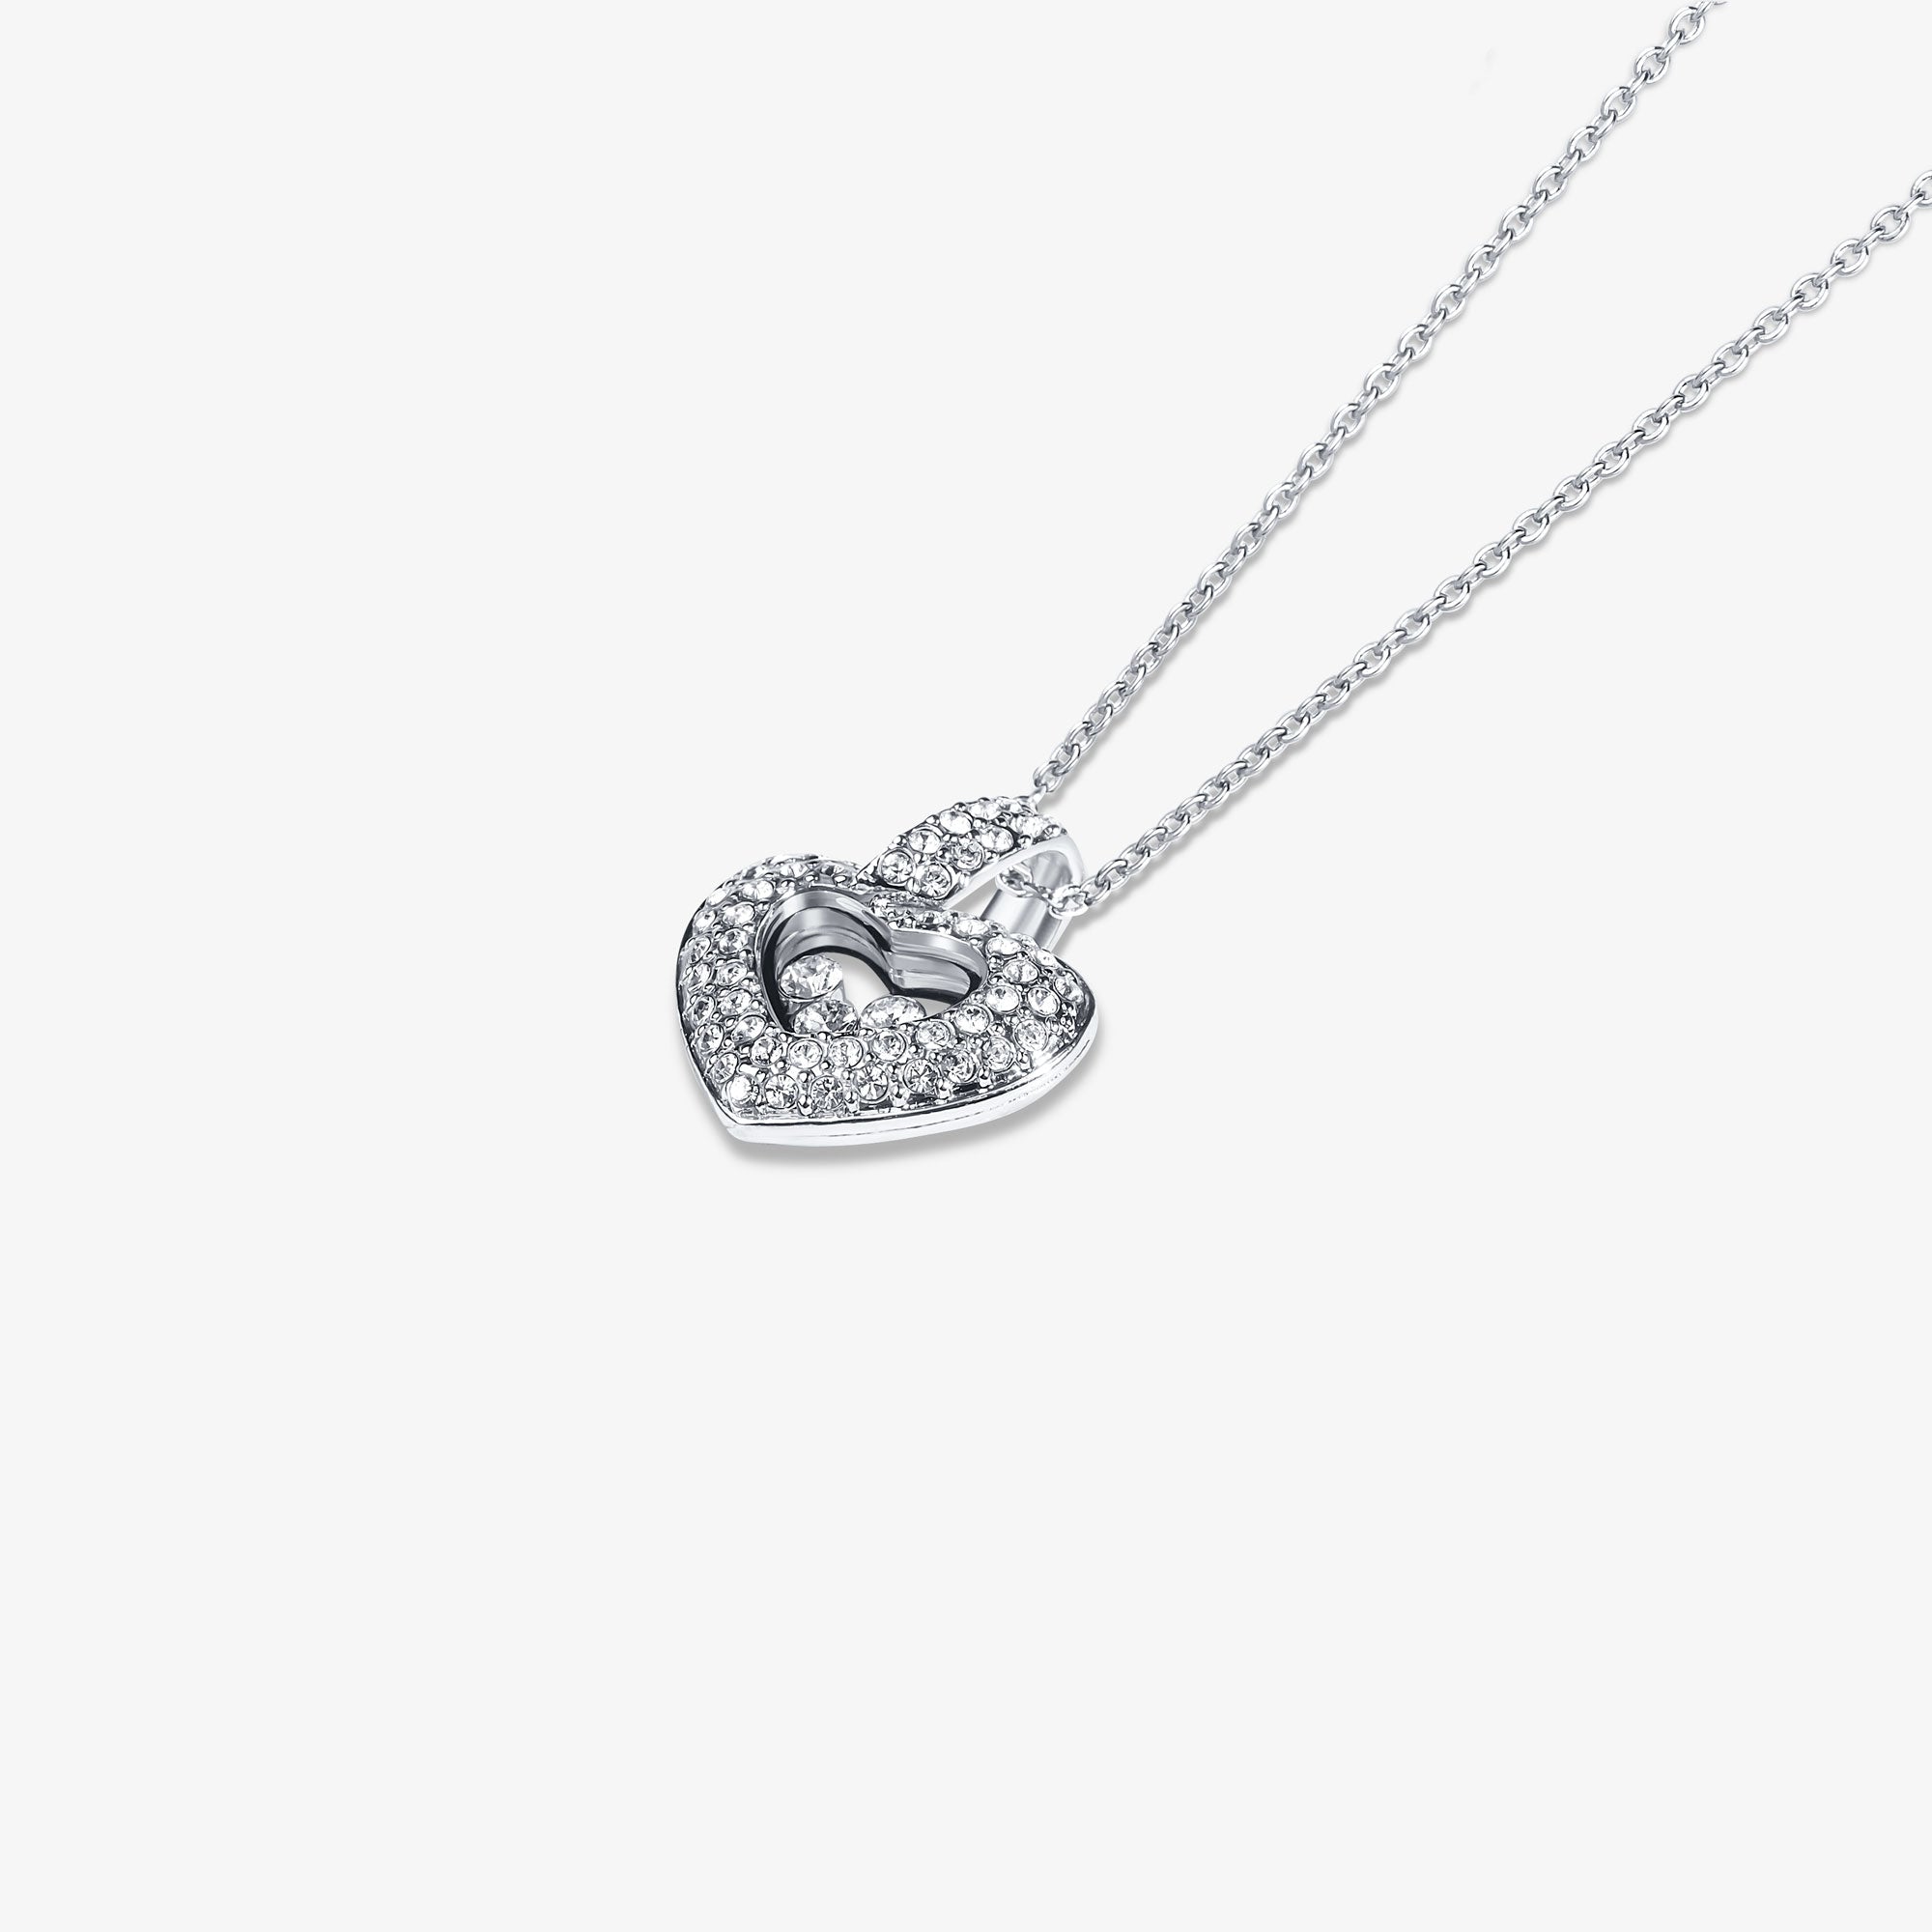 To The Mother of The Bride - Tryndi Floating Heart Necklace